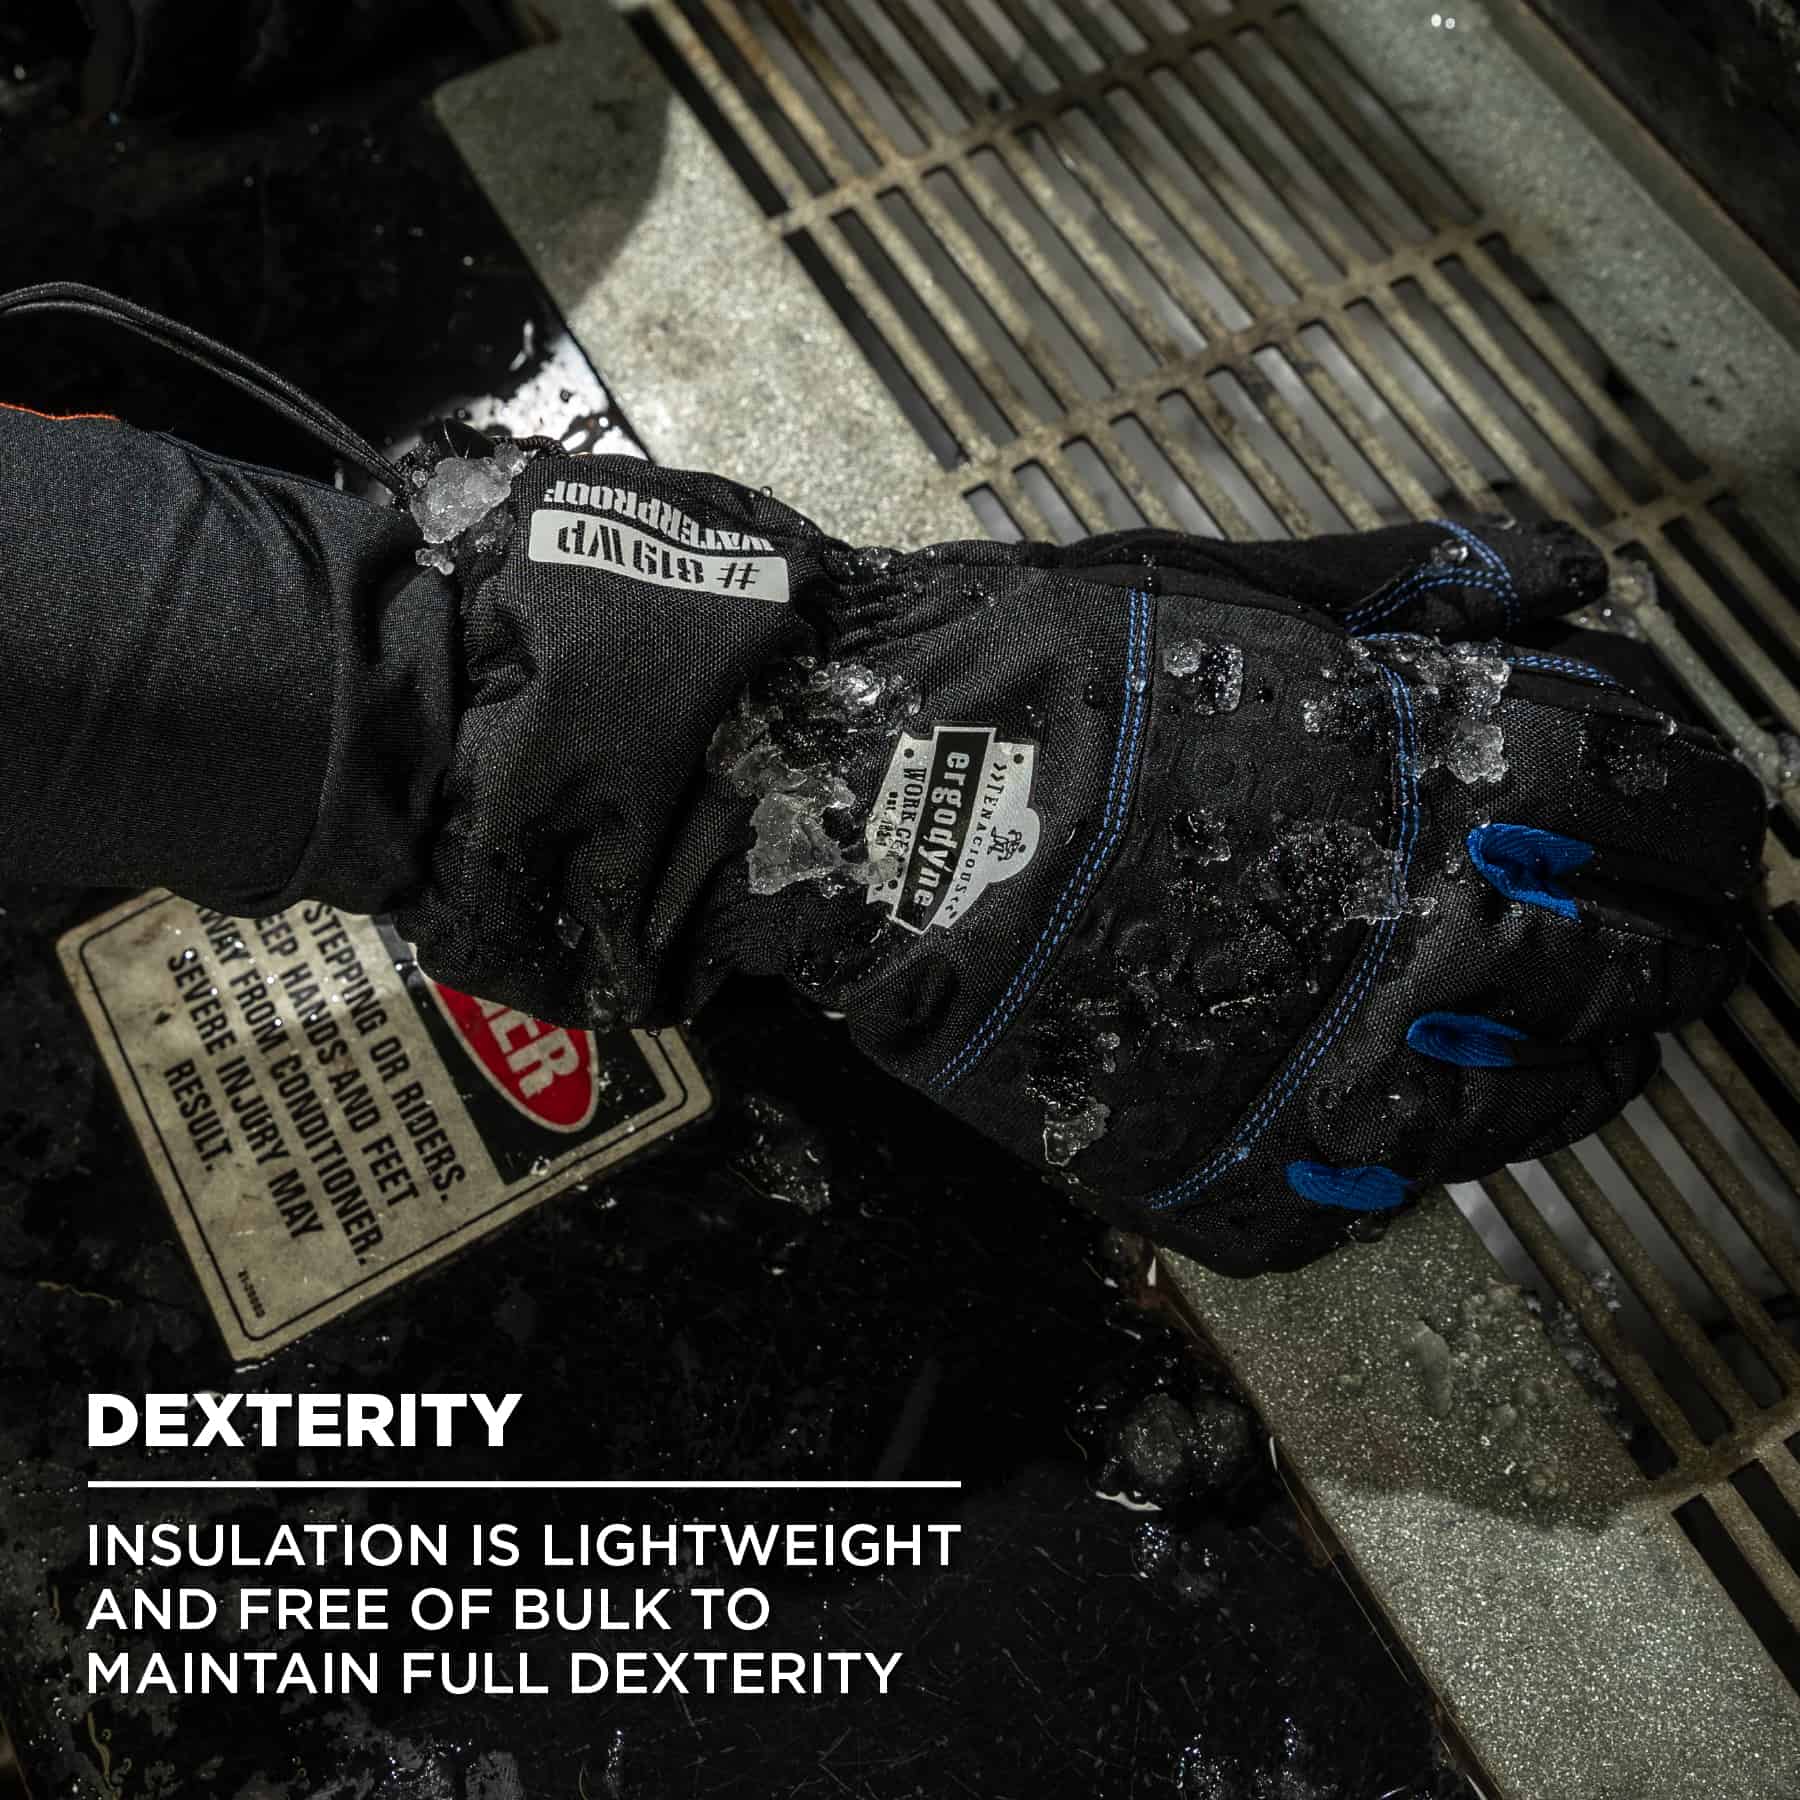 The ProFlex 819WP use lightweight and free of bulk to maintain dexterity